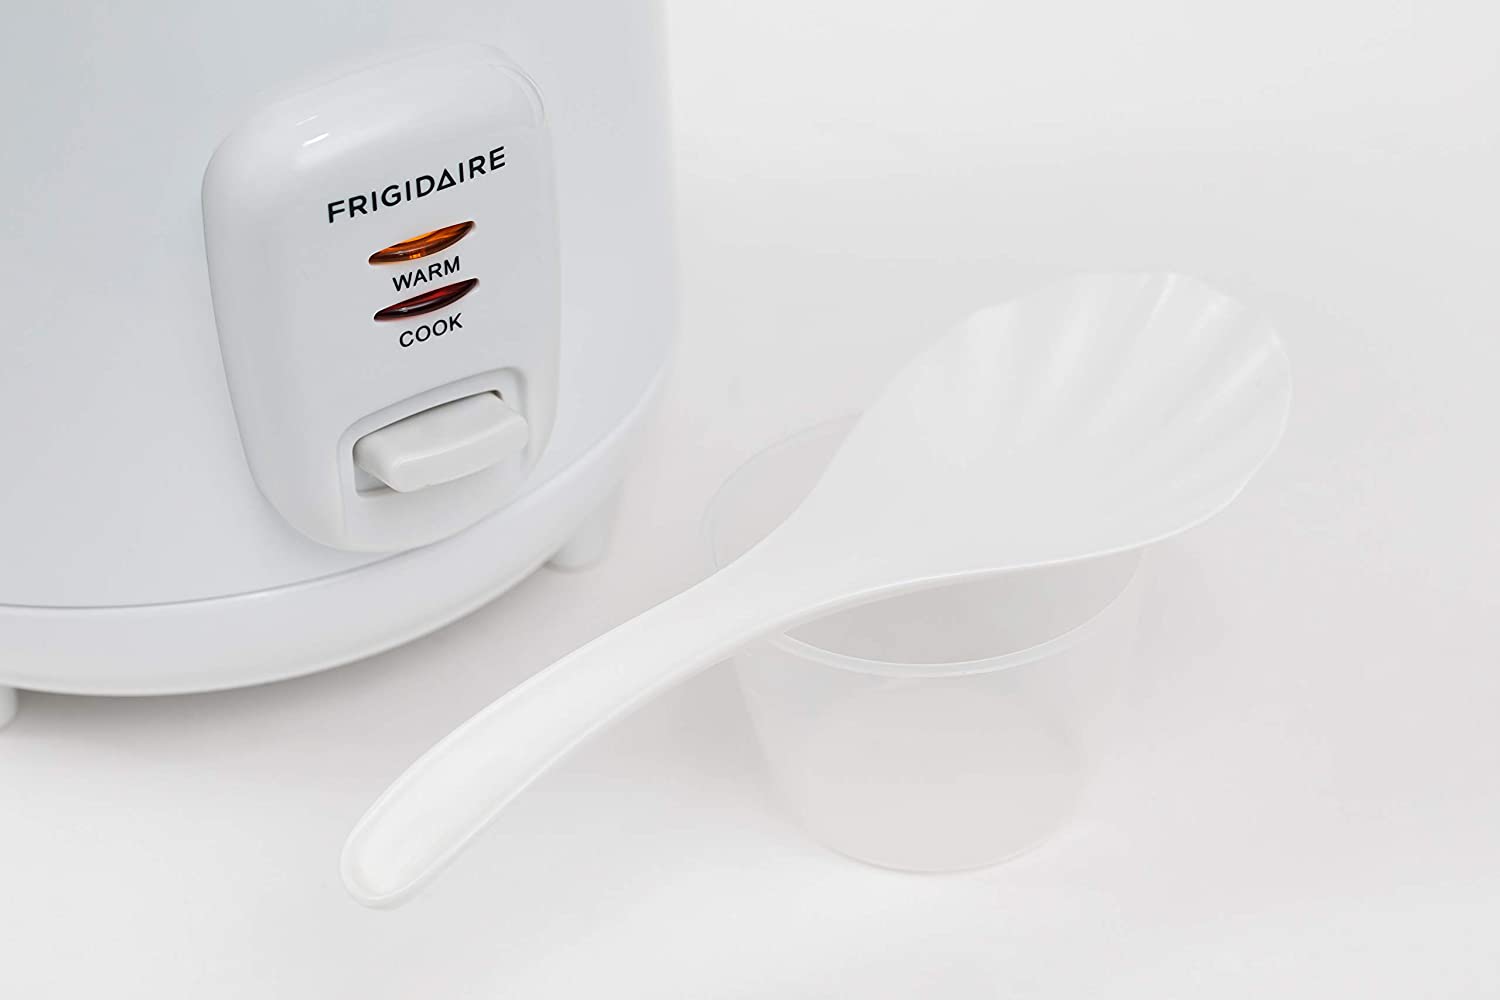 https://www.dvdoverseas.com/resize/Shared/Images/Product/Frigidaire-FD8006-220-Volt-3-Cup-Small-Rice-Cooker-For-Export-Overseas-Use/FD8006-4.jpg?bw=1000&w=1000&bh=1000&h=1000